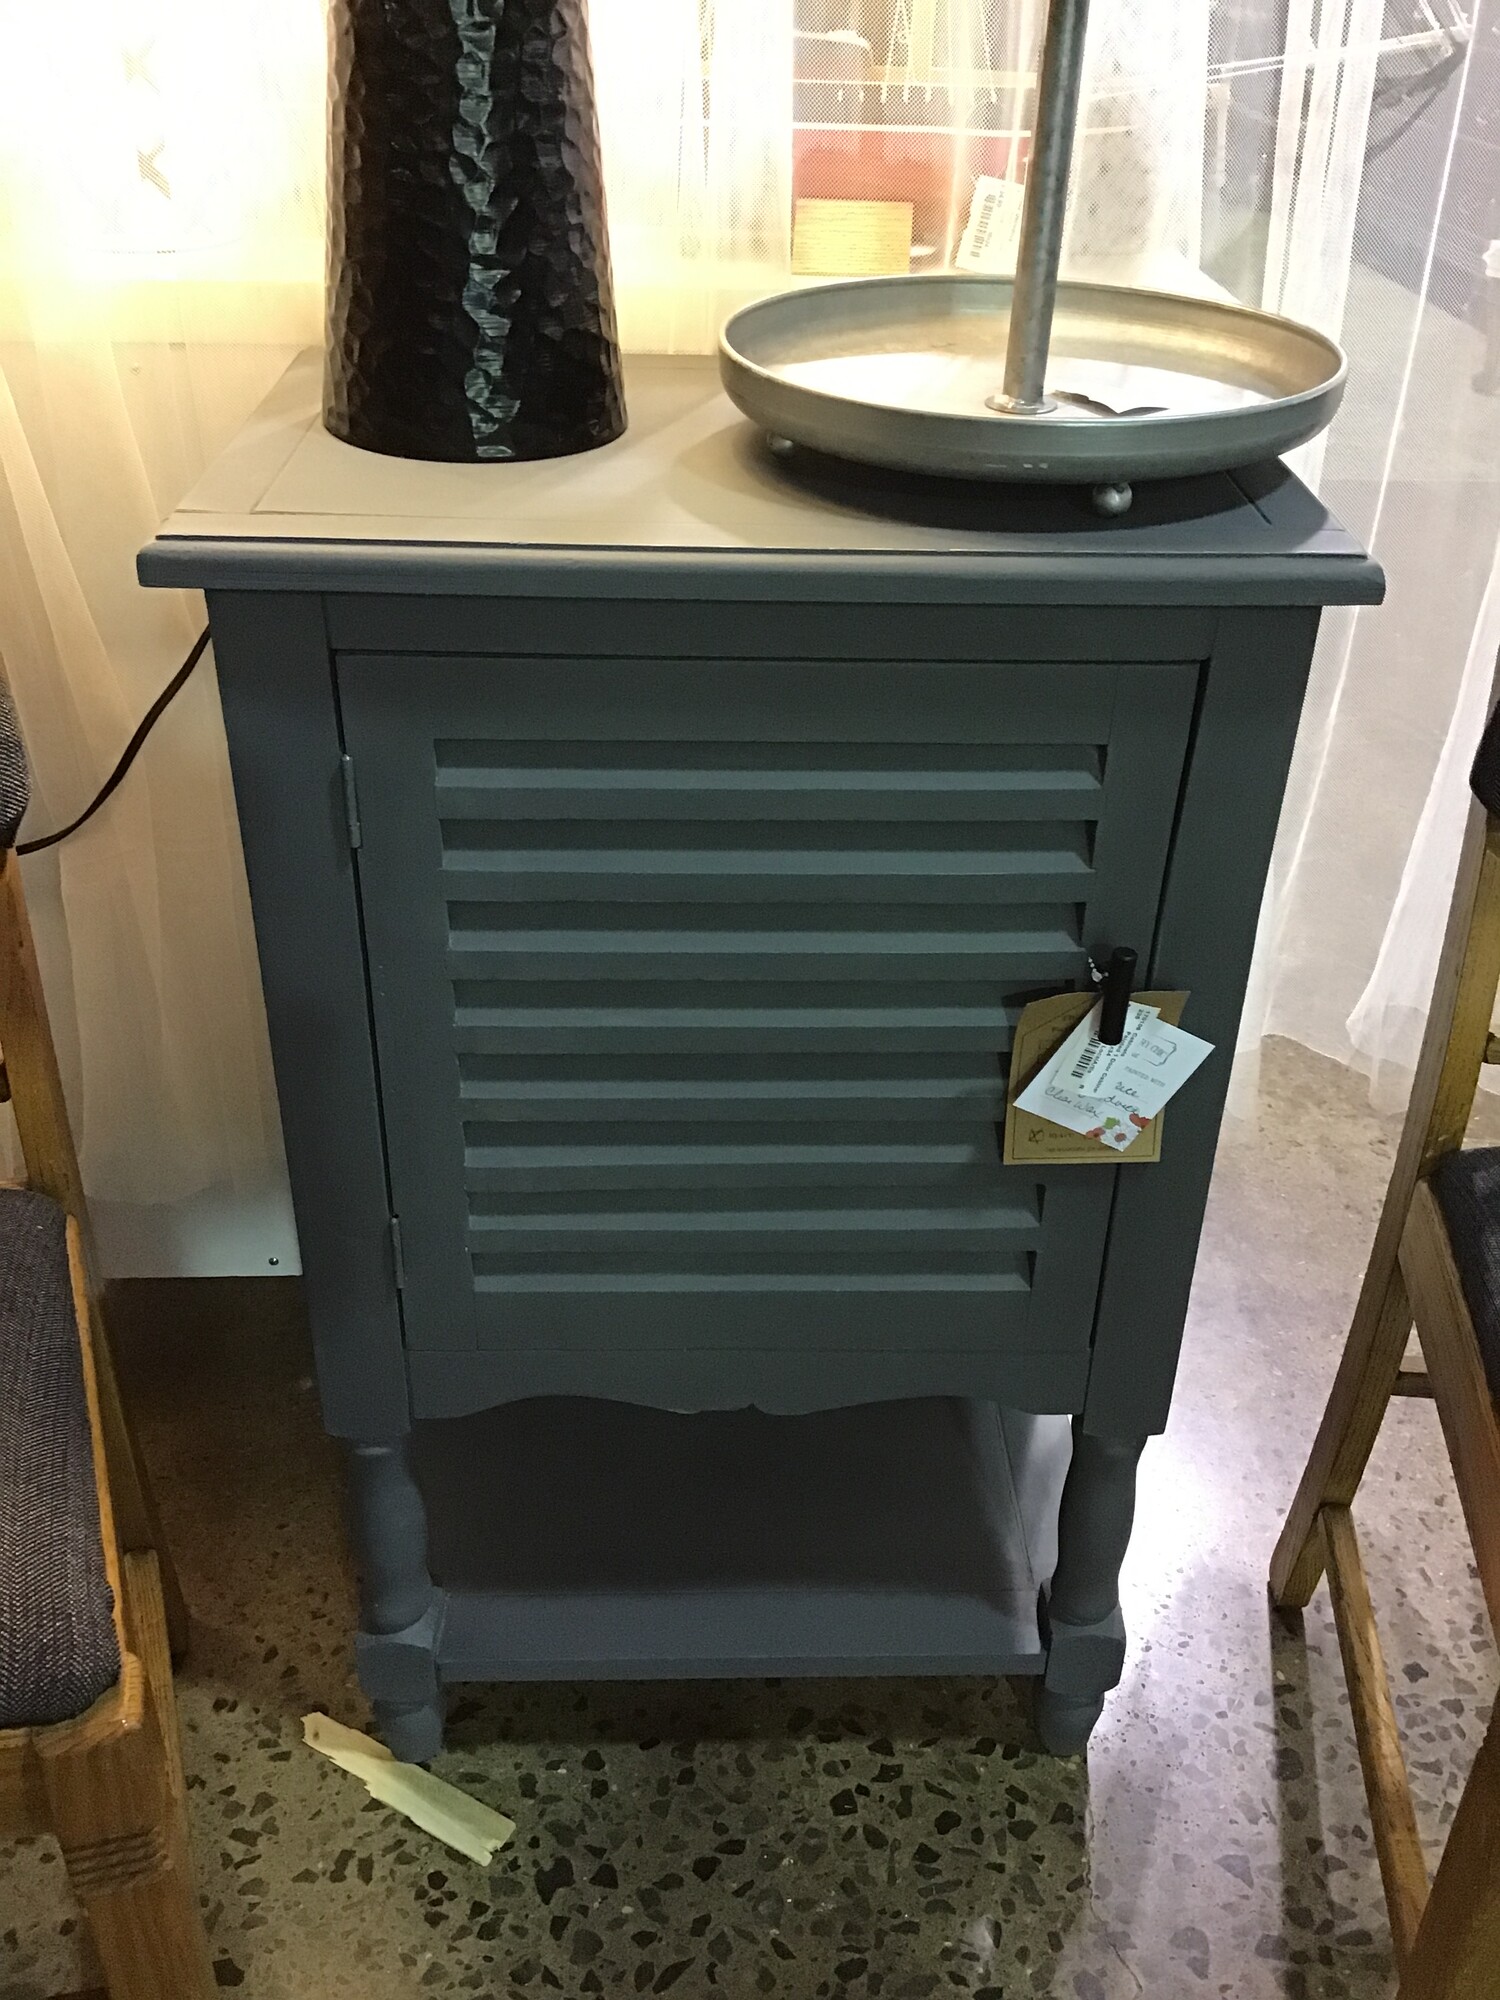 This super functional 1 door cabinet was painted by one of our local artists using a mixture of Country Chic Sage Advice and Liquorice and then clear waxed for protection. It is painted on all 4 sides and features an internal shelf, shutter doors and lower shelf.
Dimensions are 21 in x 14 in x 34 in